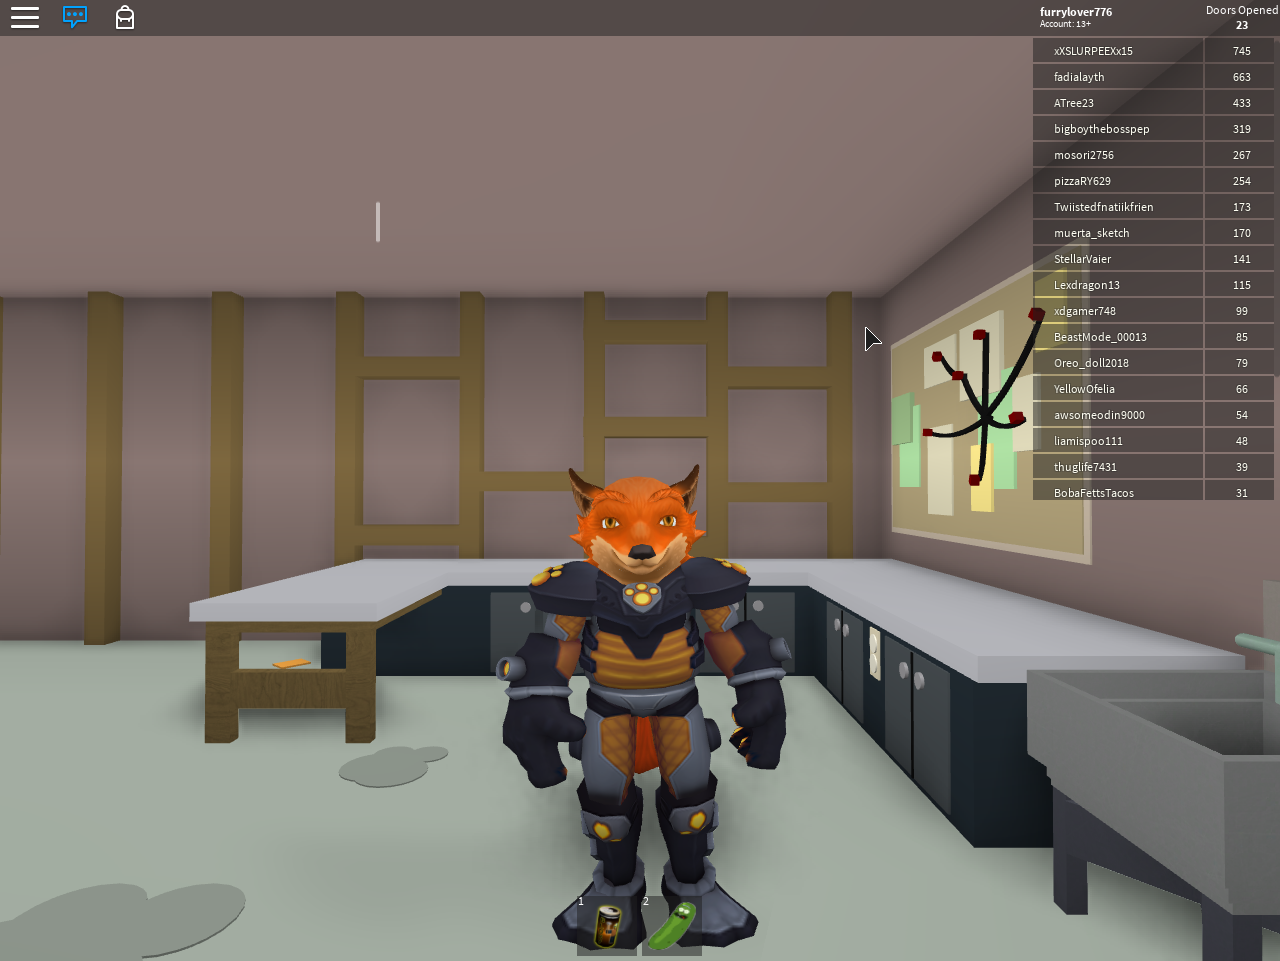 Furry In A Roblox Game By Furryfoxwolfxd Fur Affinity Dot Net - male fox furry art roblox